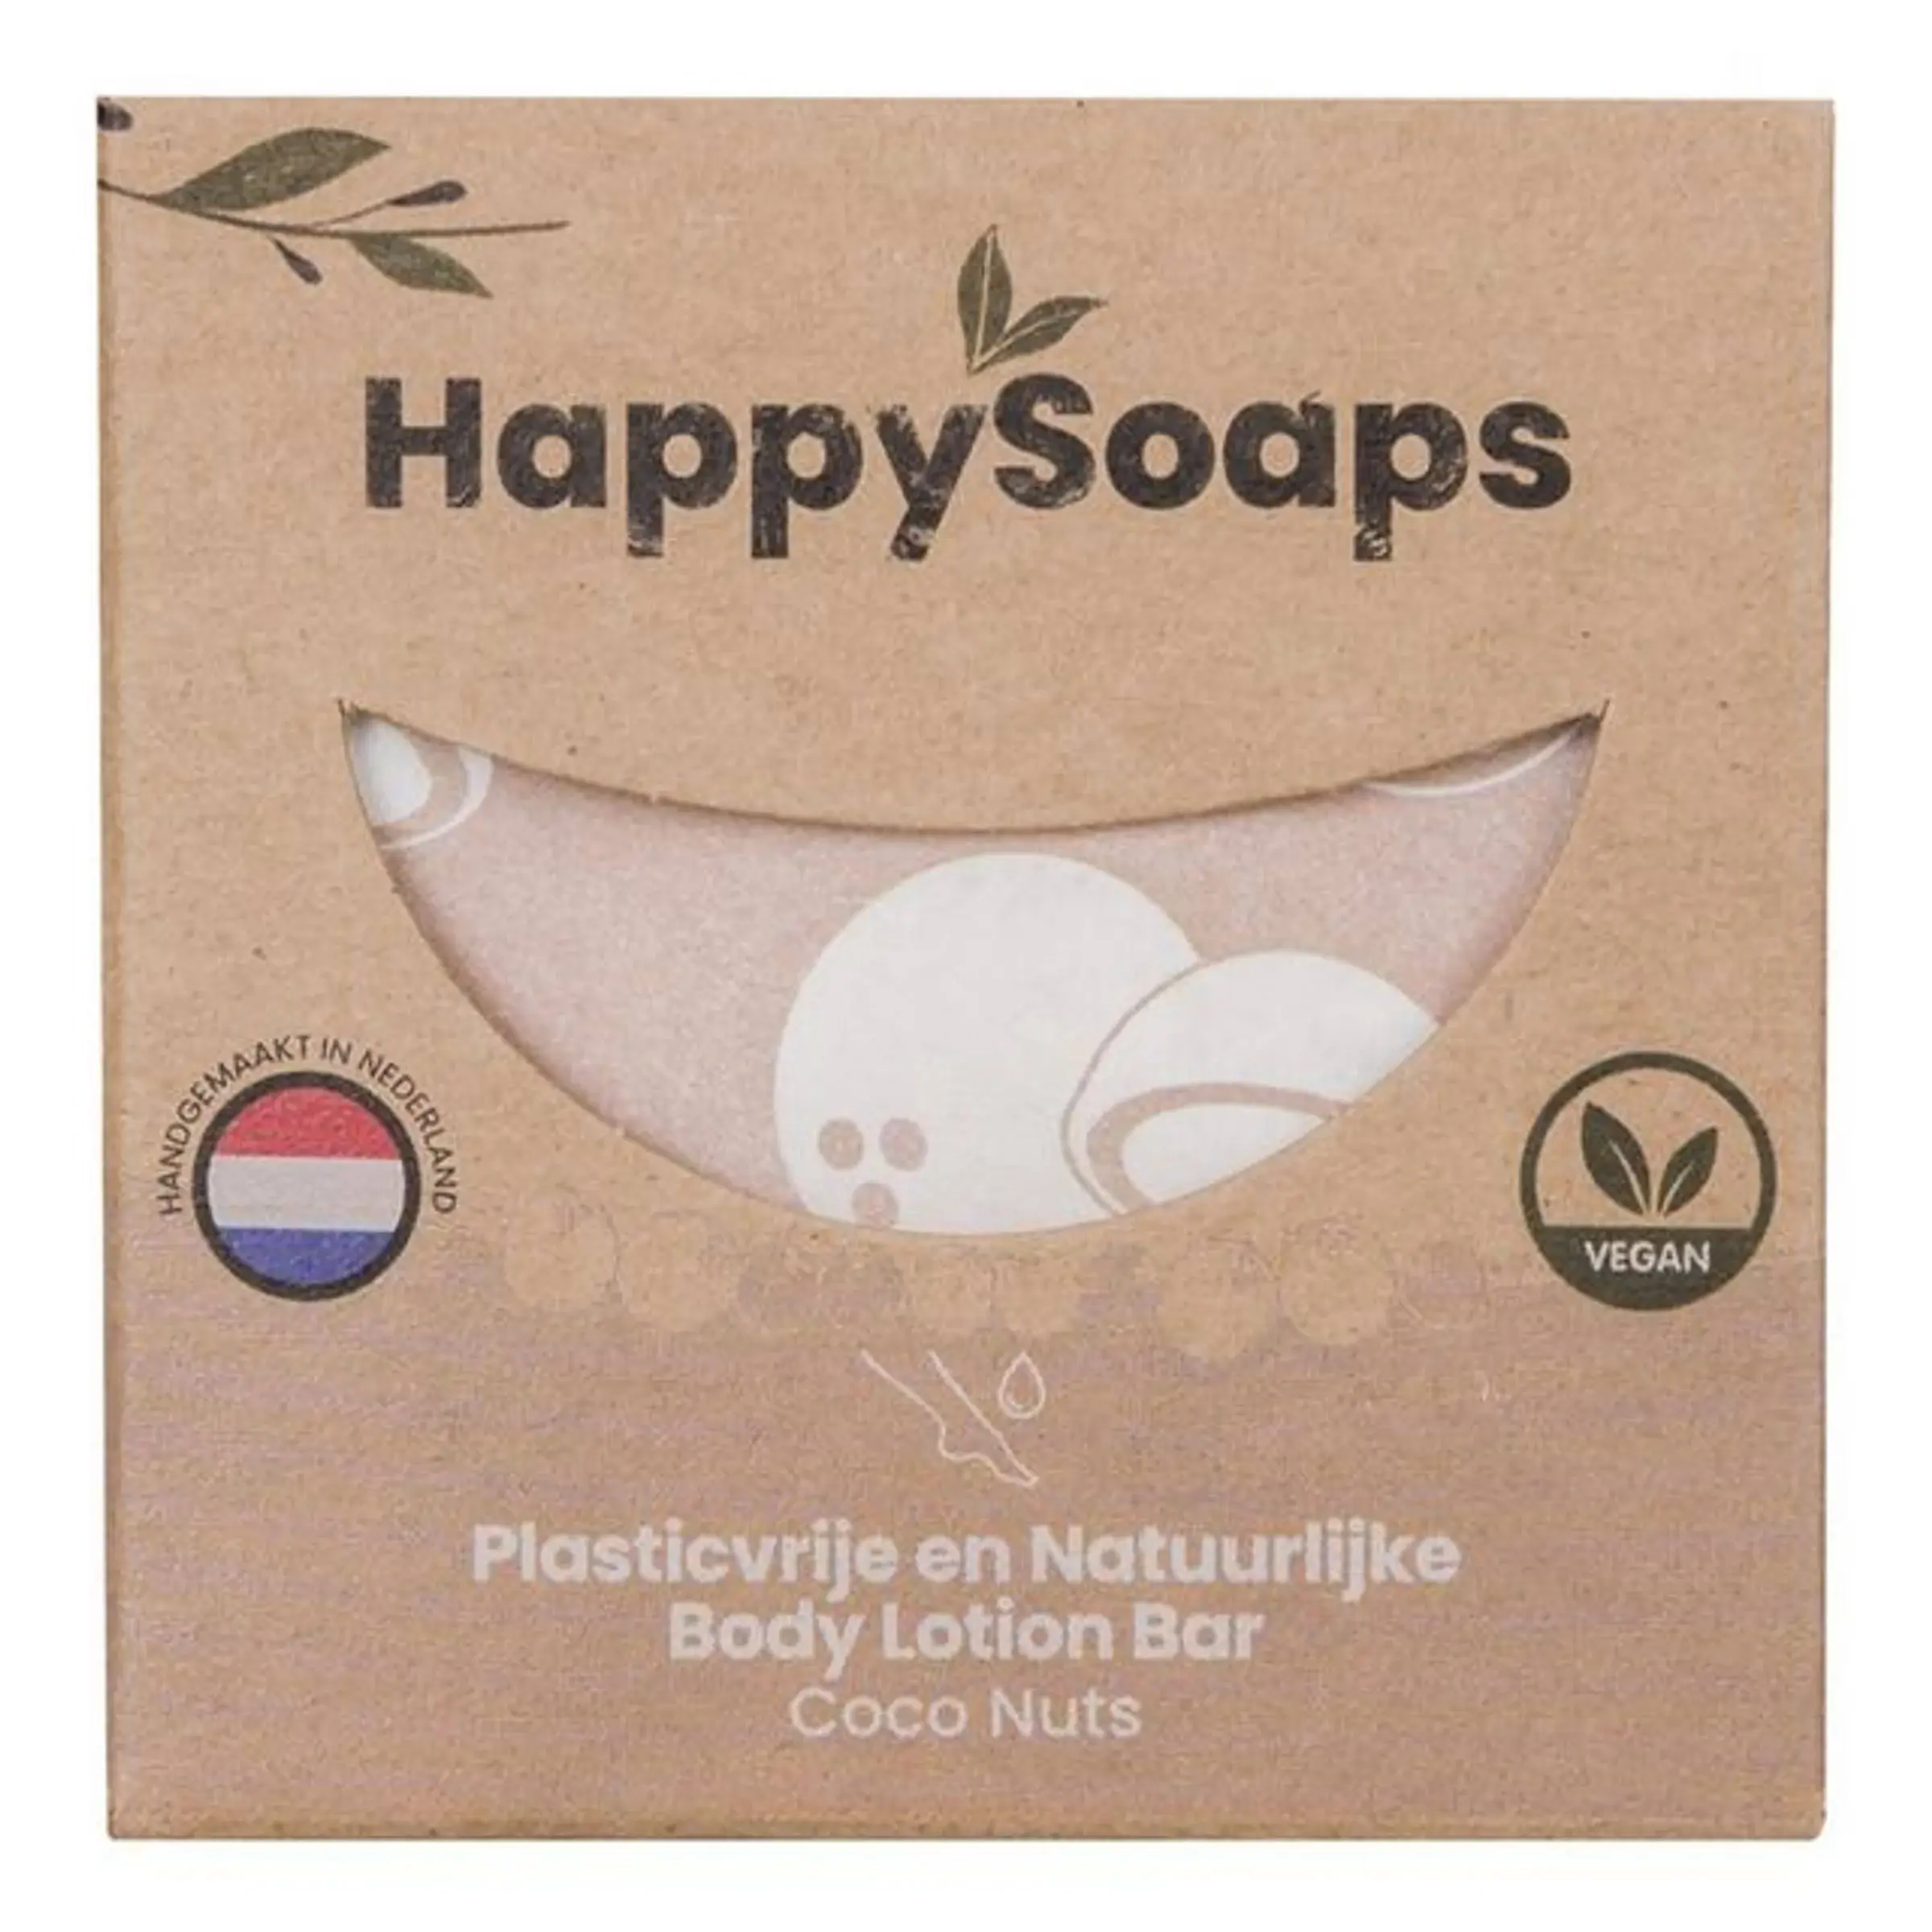 Happysoaps Body Lotion Bar - Coco Nuts